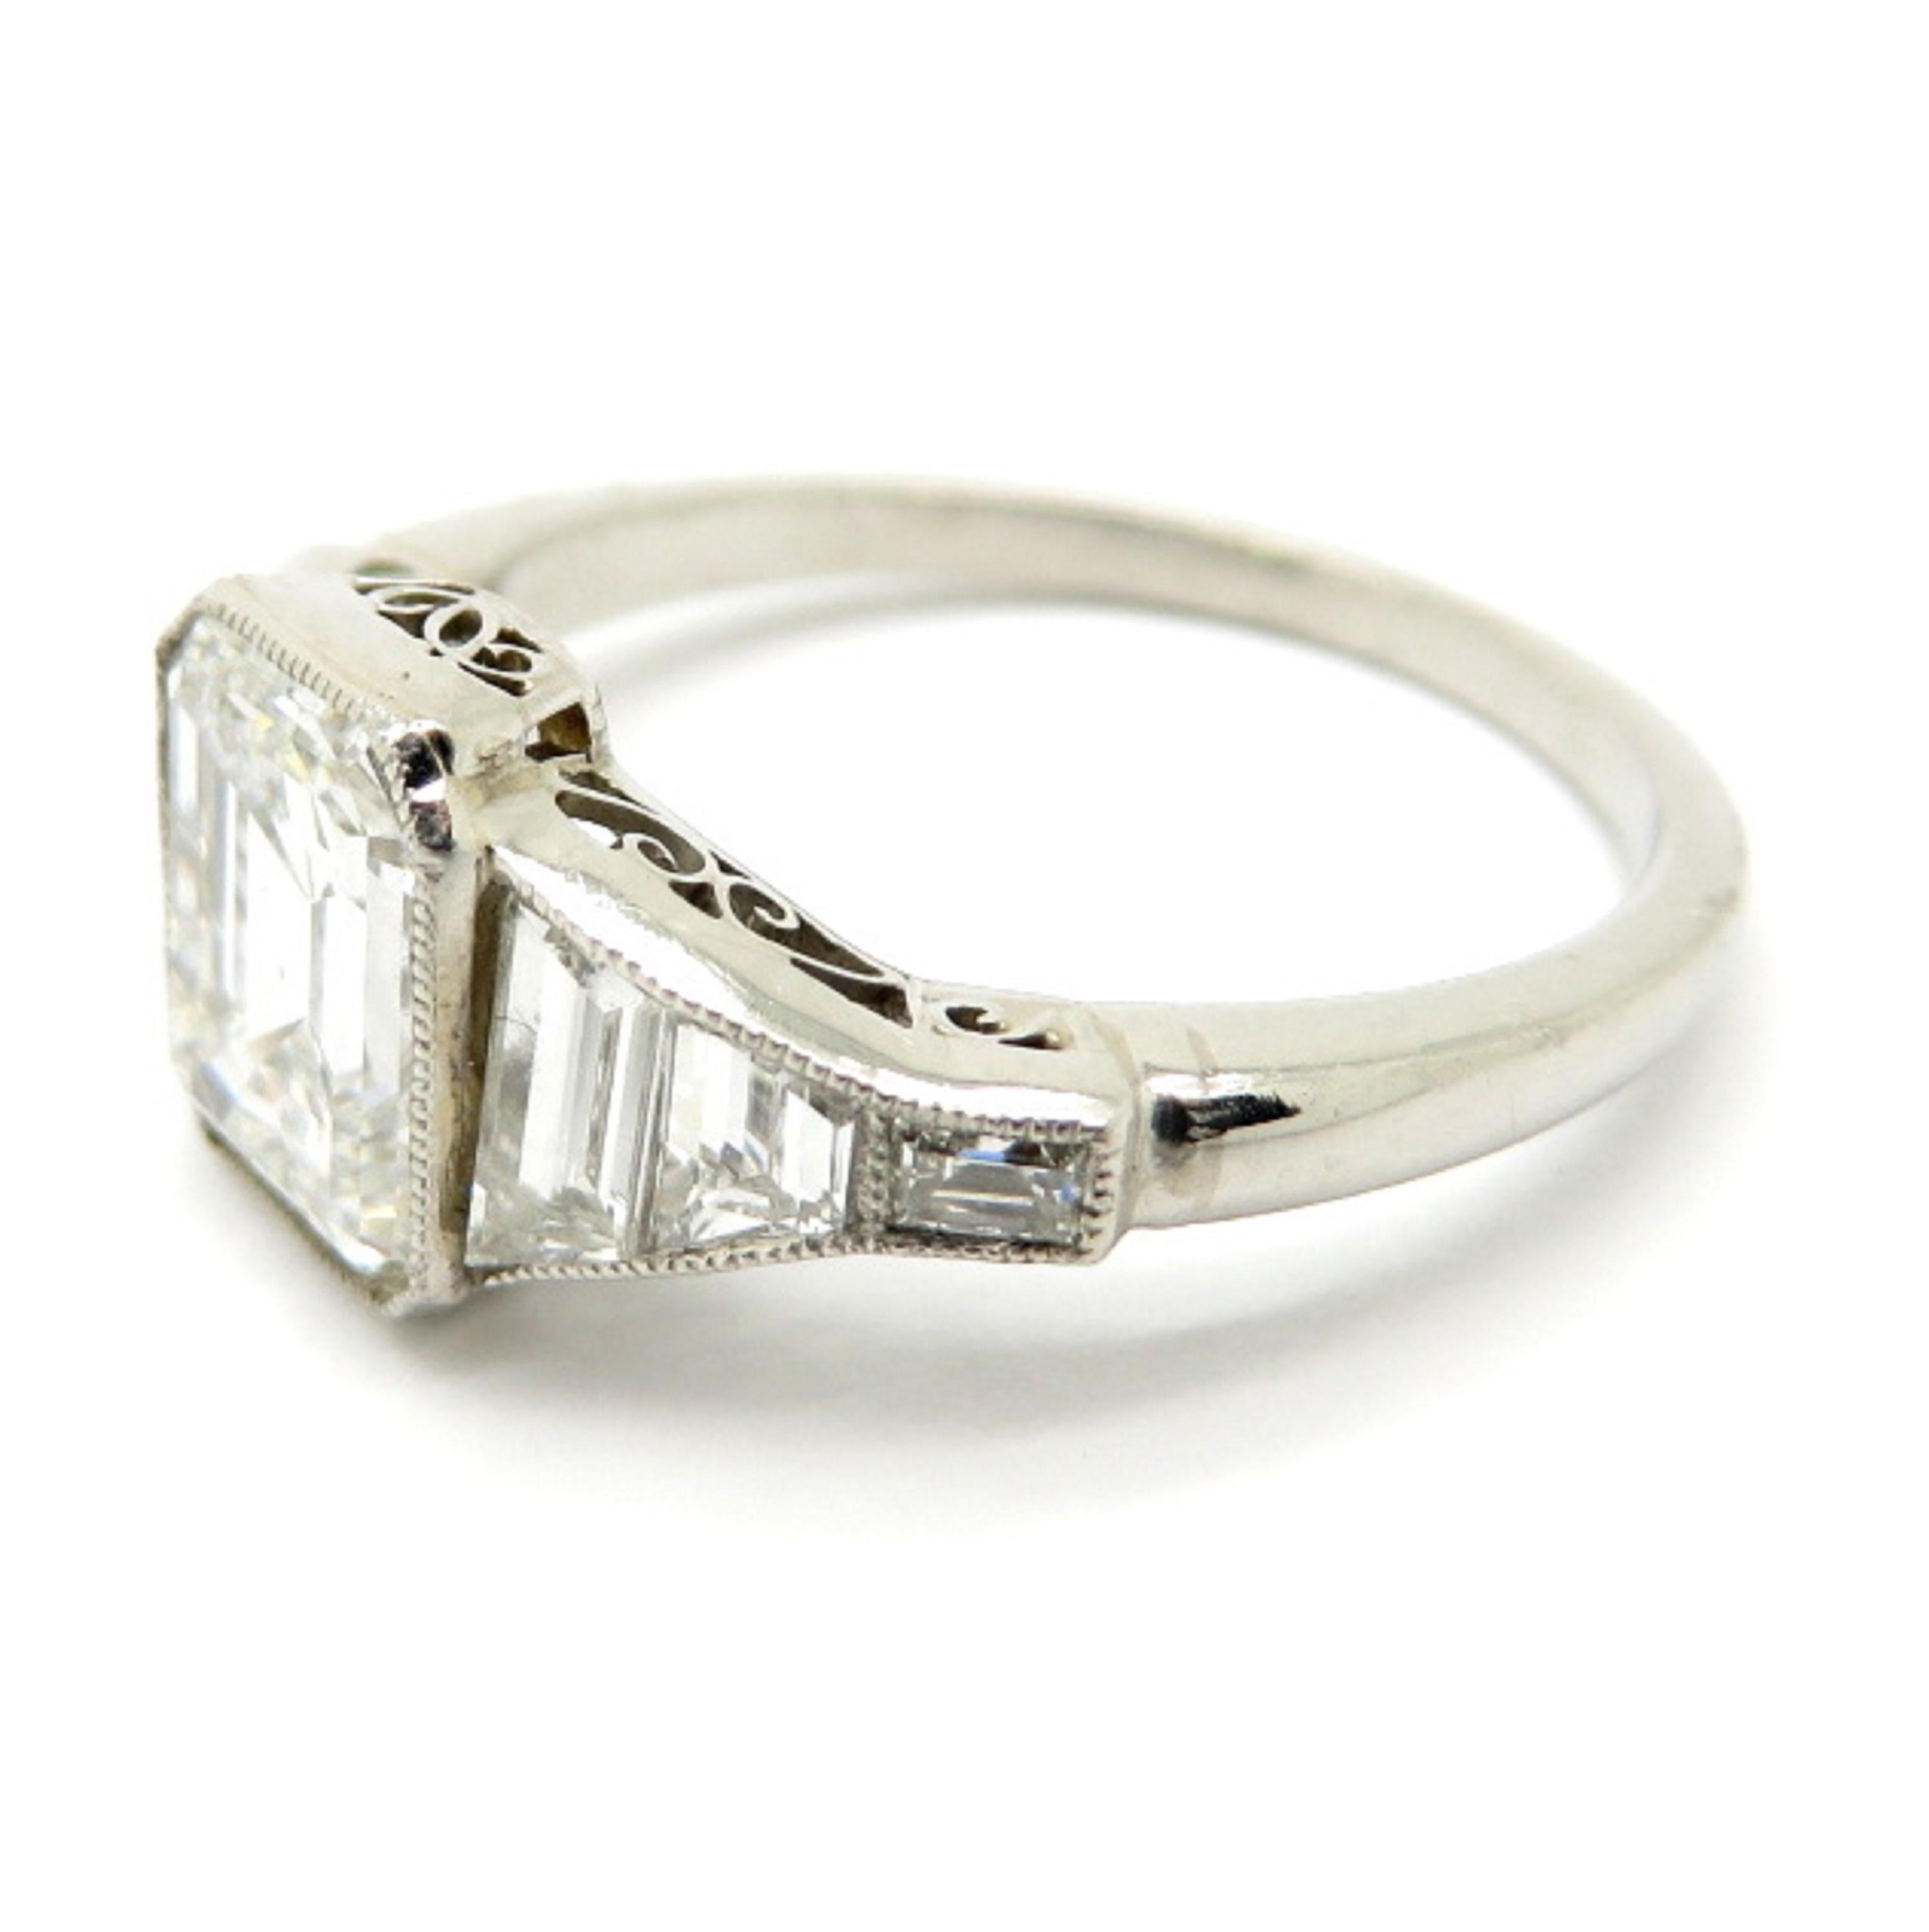 For sale is a stunning Platinum Diamond GIA Certified Engagement Ring with a milgrain border! 
One (1) Emerald Cut diamond, bezel set in a milgrain design, weighs approximately 1.98 carats. 
Diamond Grading: Color Grade: E. Clarity Grade: VS1.